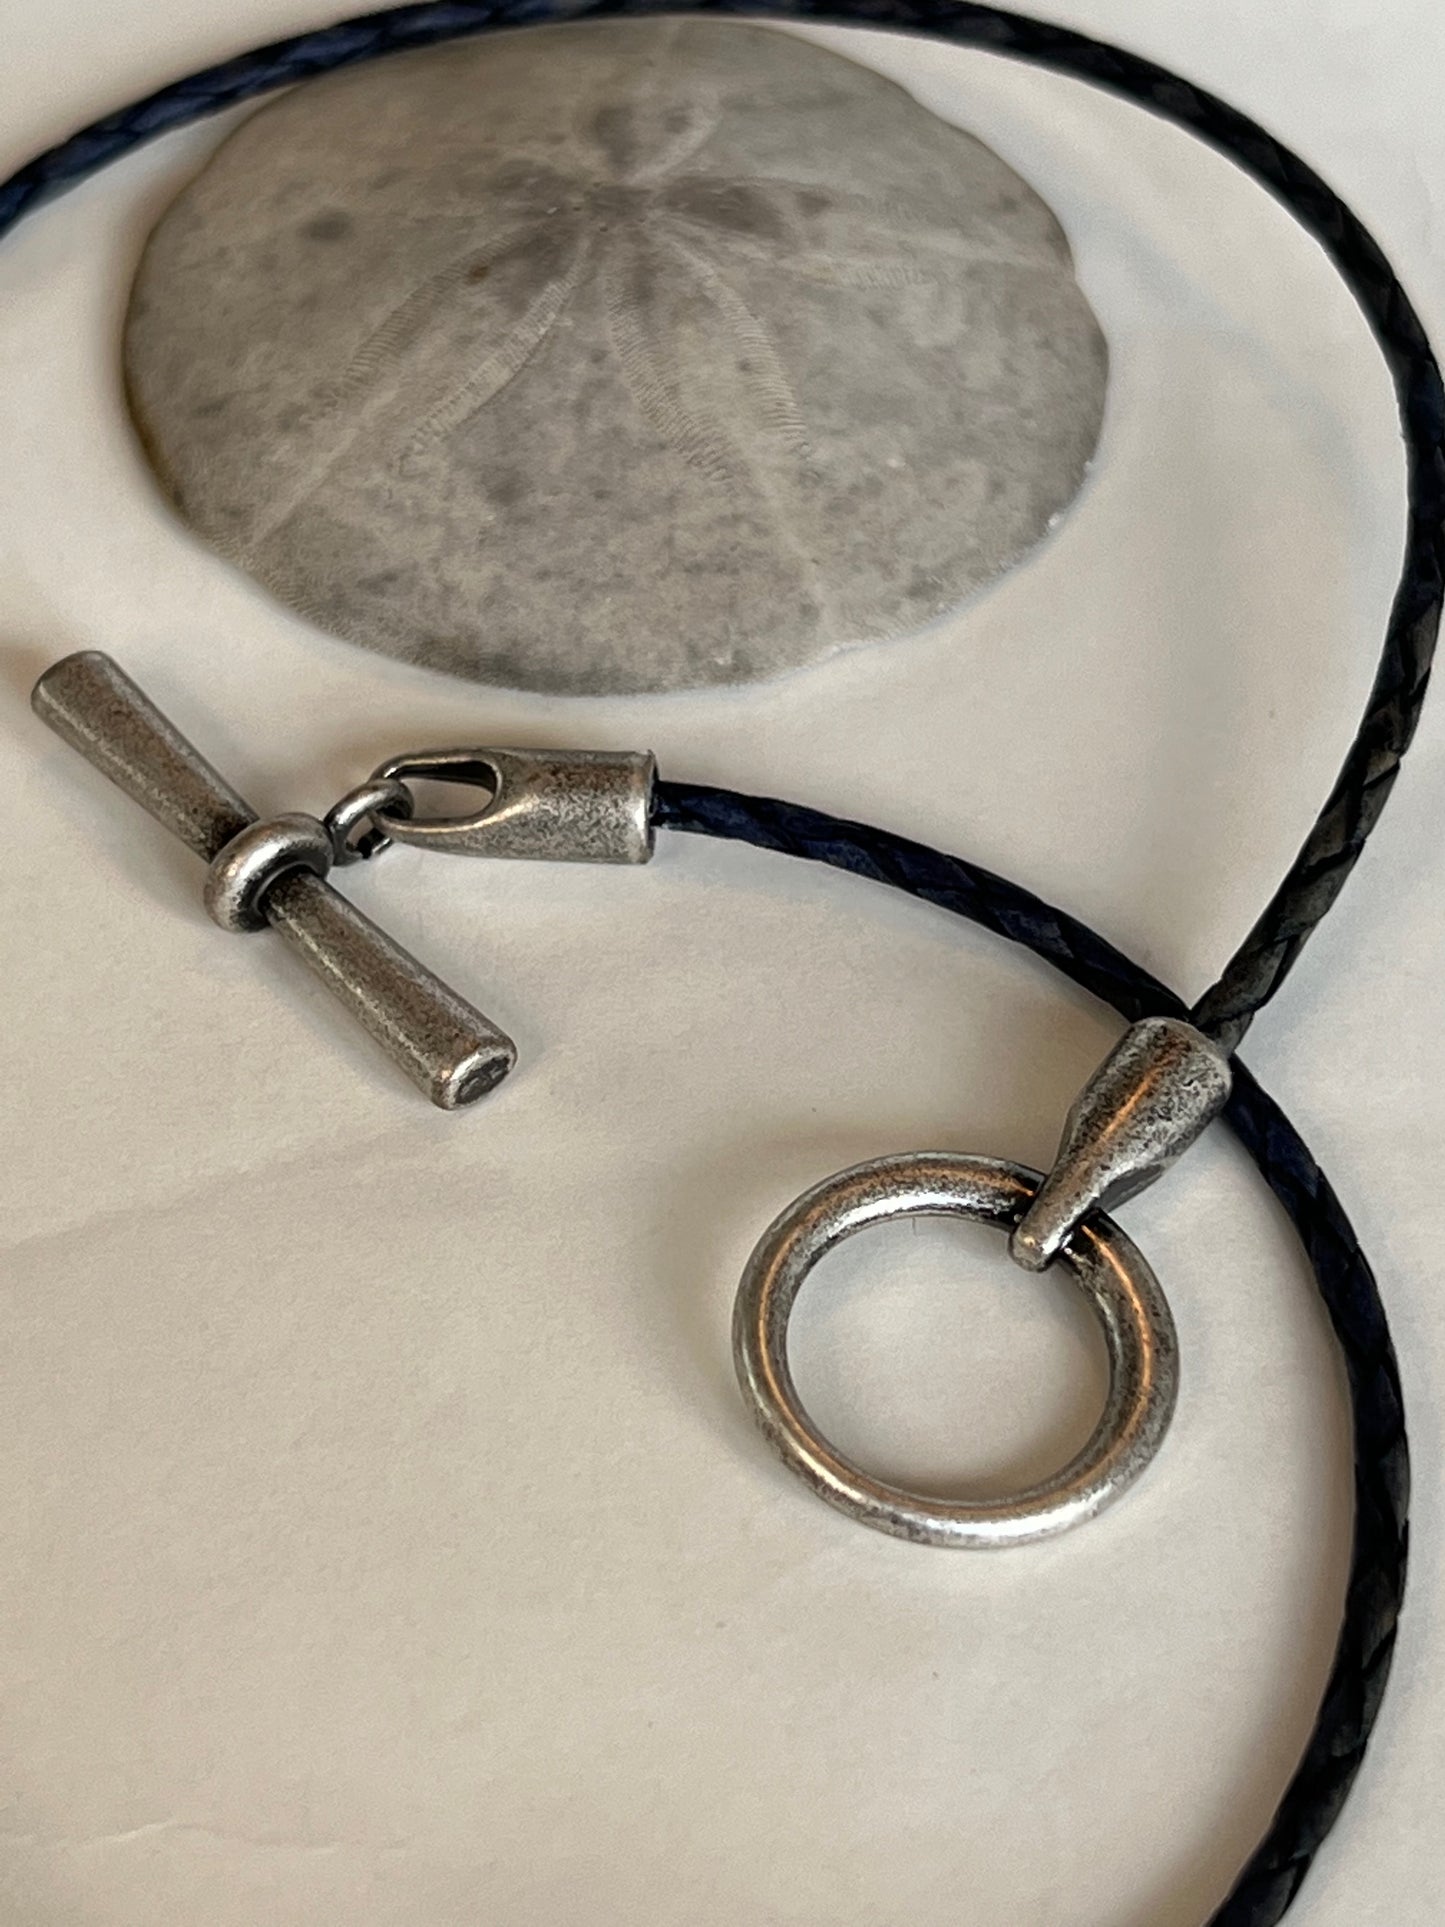 Leather Necklace  Sweet dark blue braided Italian leather necklace. Accented with a silver toggle clasp to be worn in the front as a focal piece.  16.5" long.